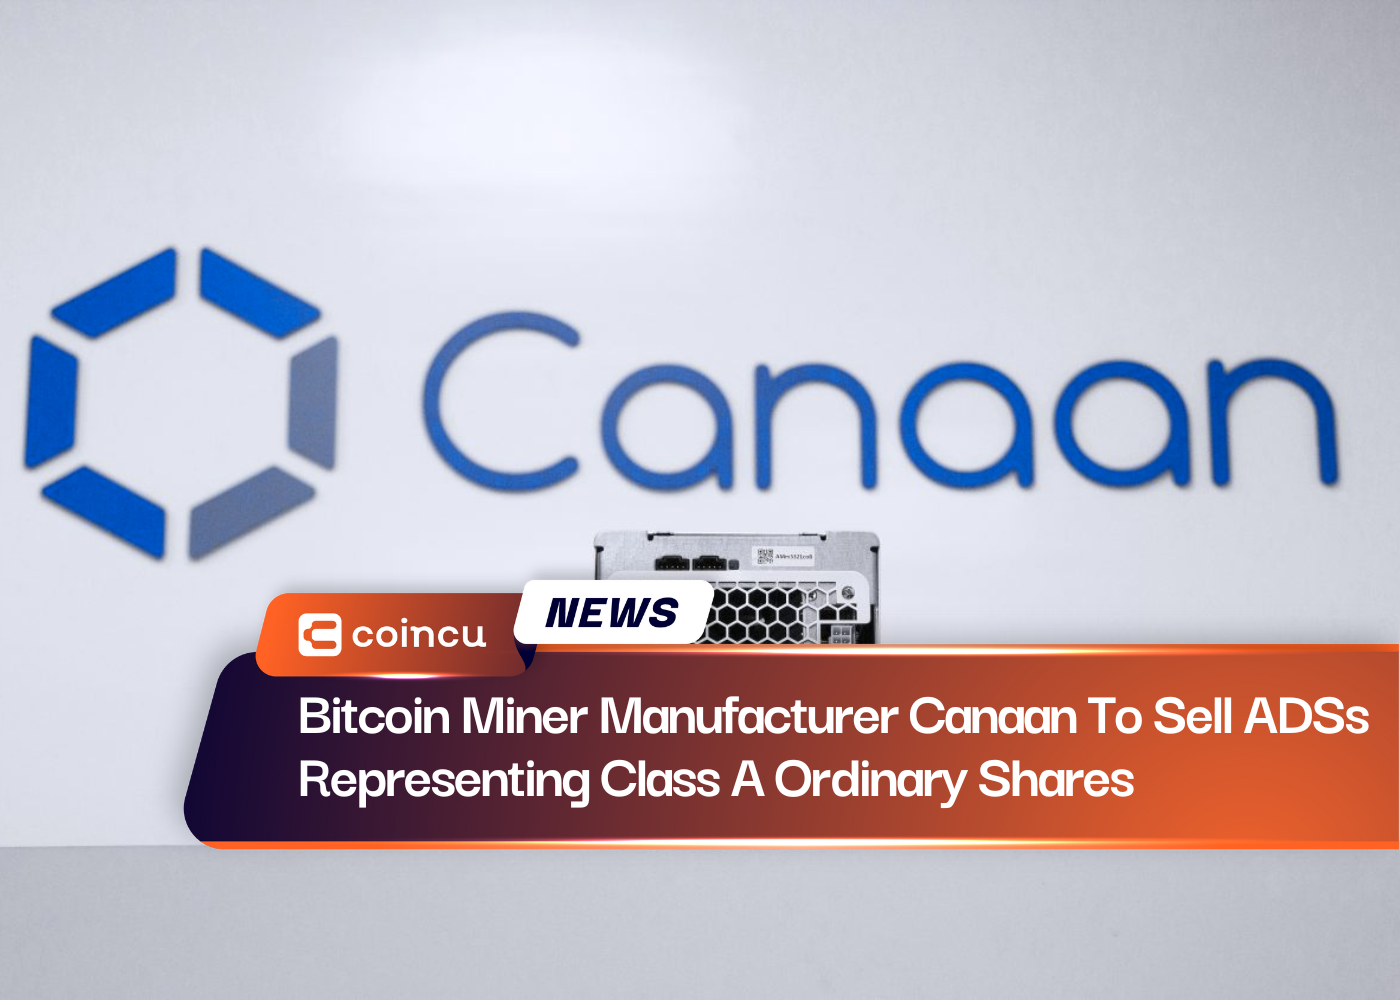 Bitcoin Miner Manufacturer Canaan To Sell ADSs Representing Class A Ordinary Shares